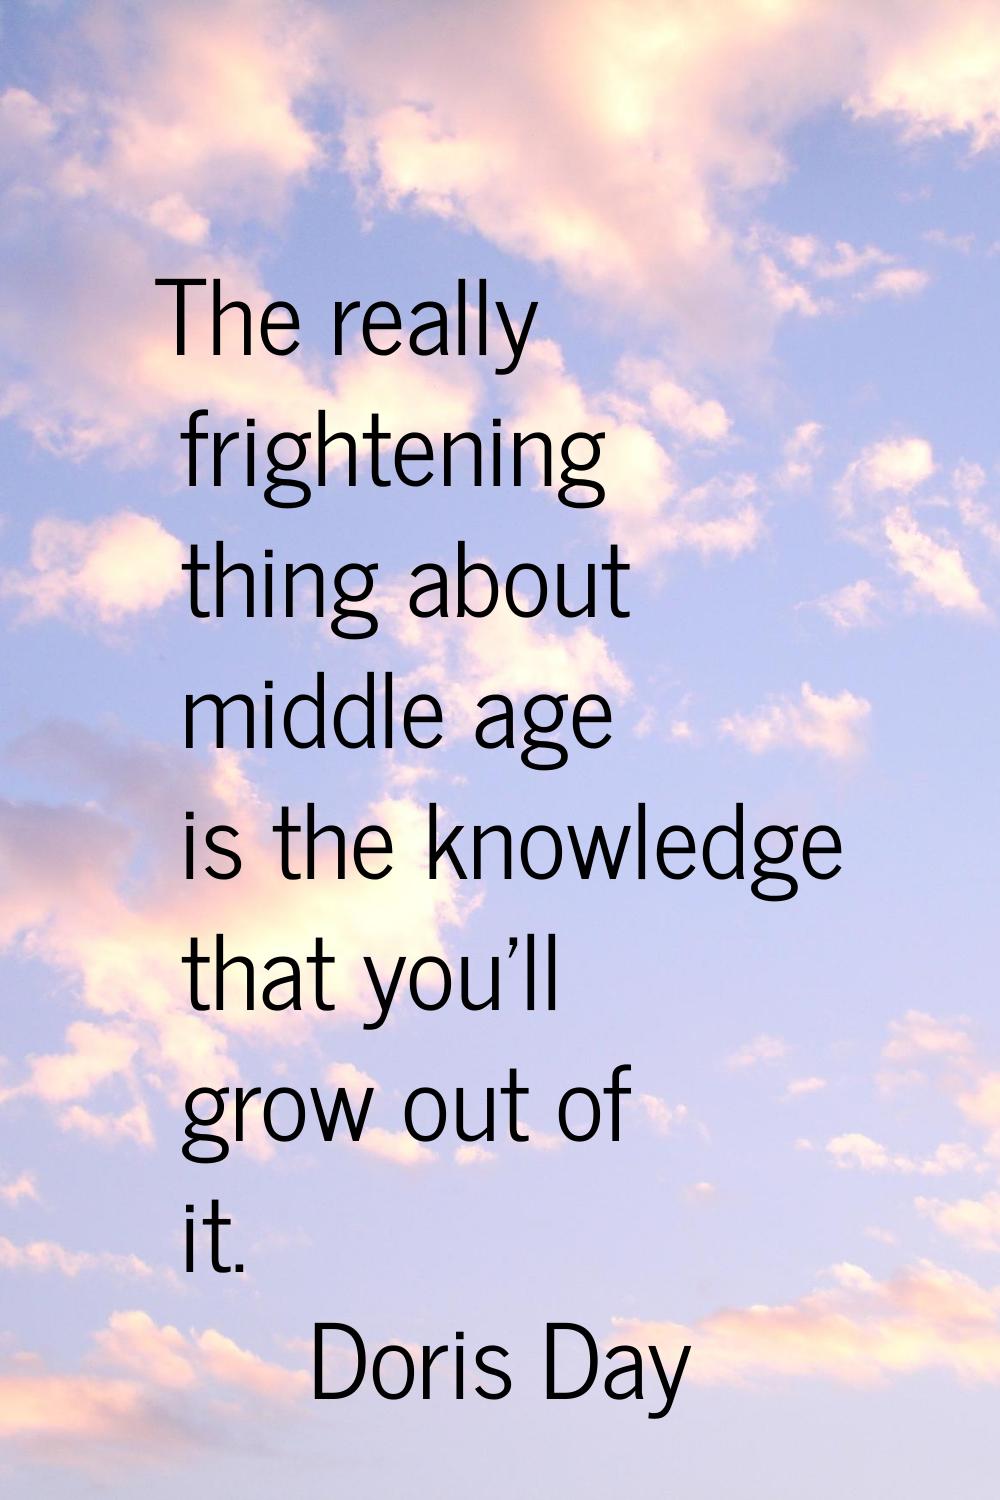 The really frightening thing about middle age is the knowledge that you'll grow out of it.